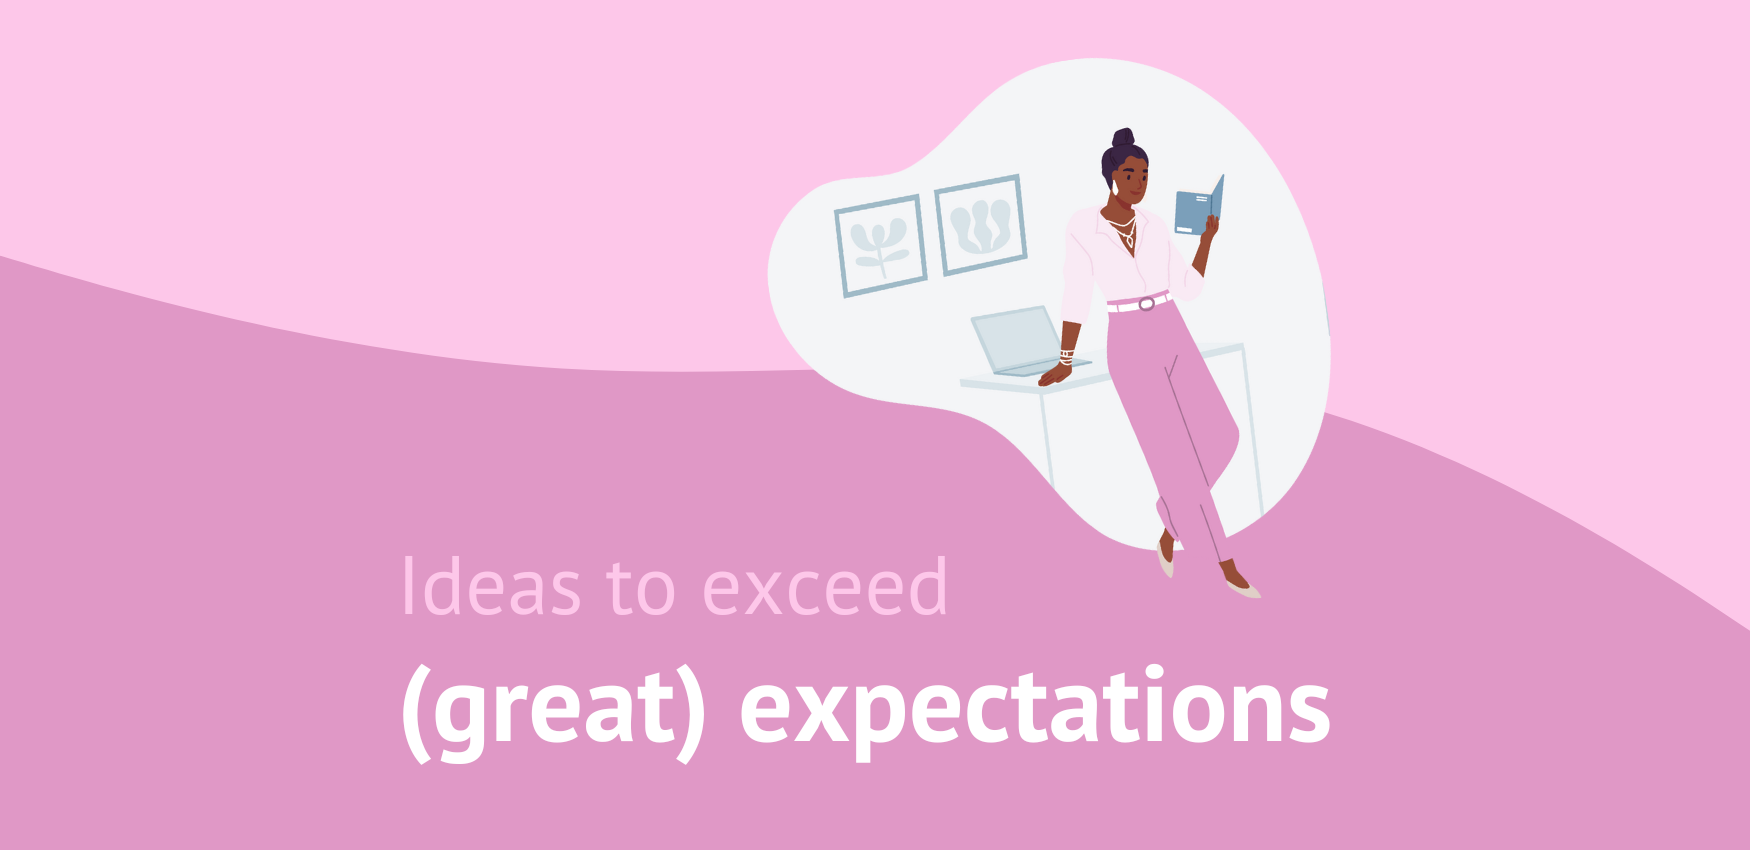 3 Noteworthy Ideas to Exceed (Great) Expectations